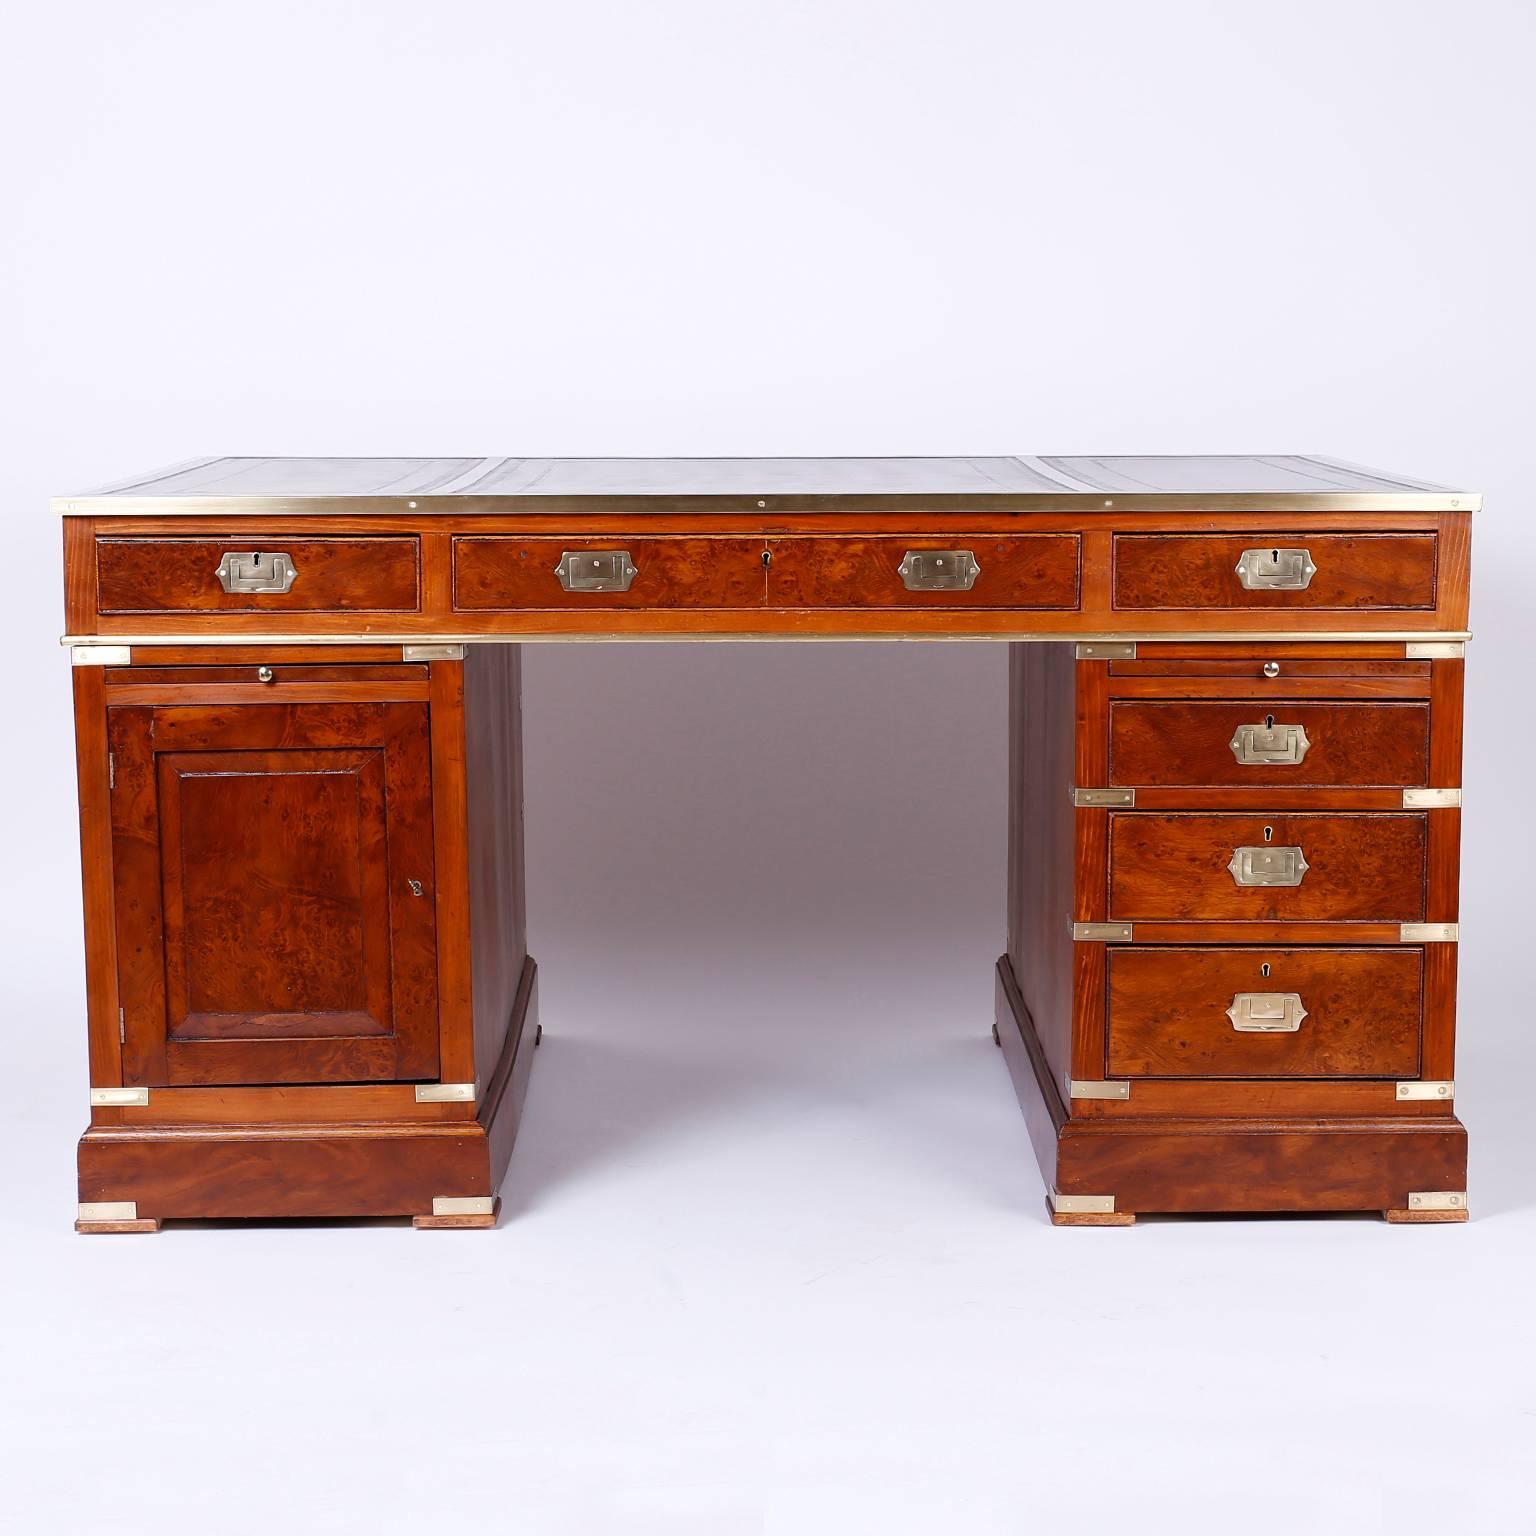 Stand out 19th century mahogany three-piece partners desk with three brown tooled leather panels on top. The top case has three drawers on either side and outlined with brass. The pedestals have three drawers on one side and a cabinet door on the